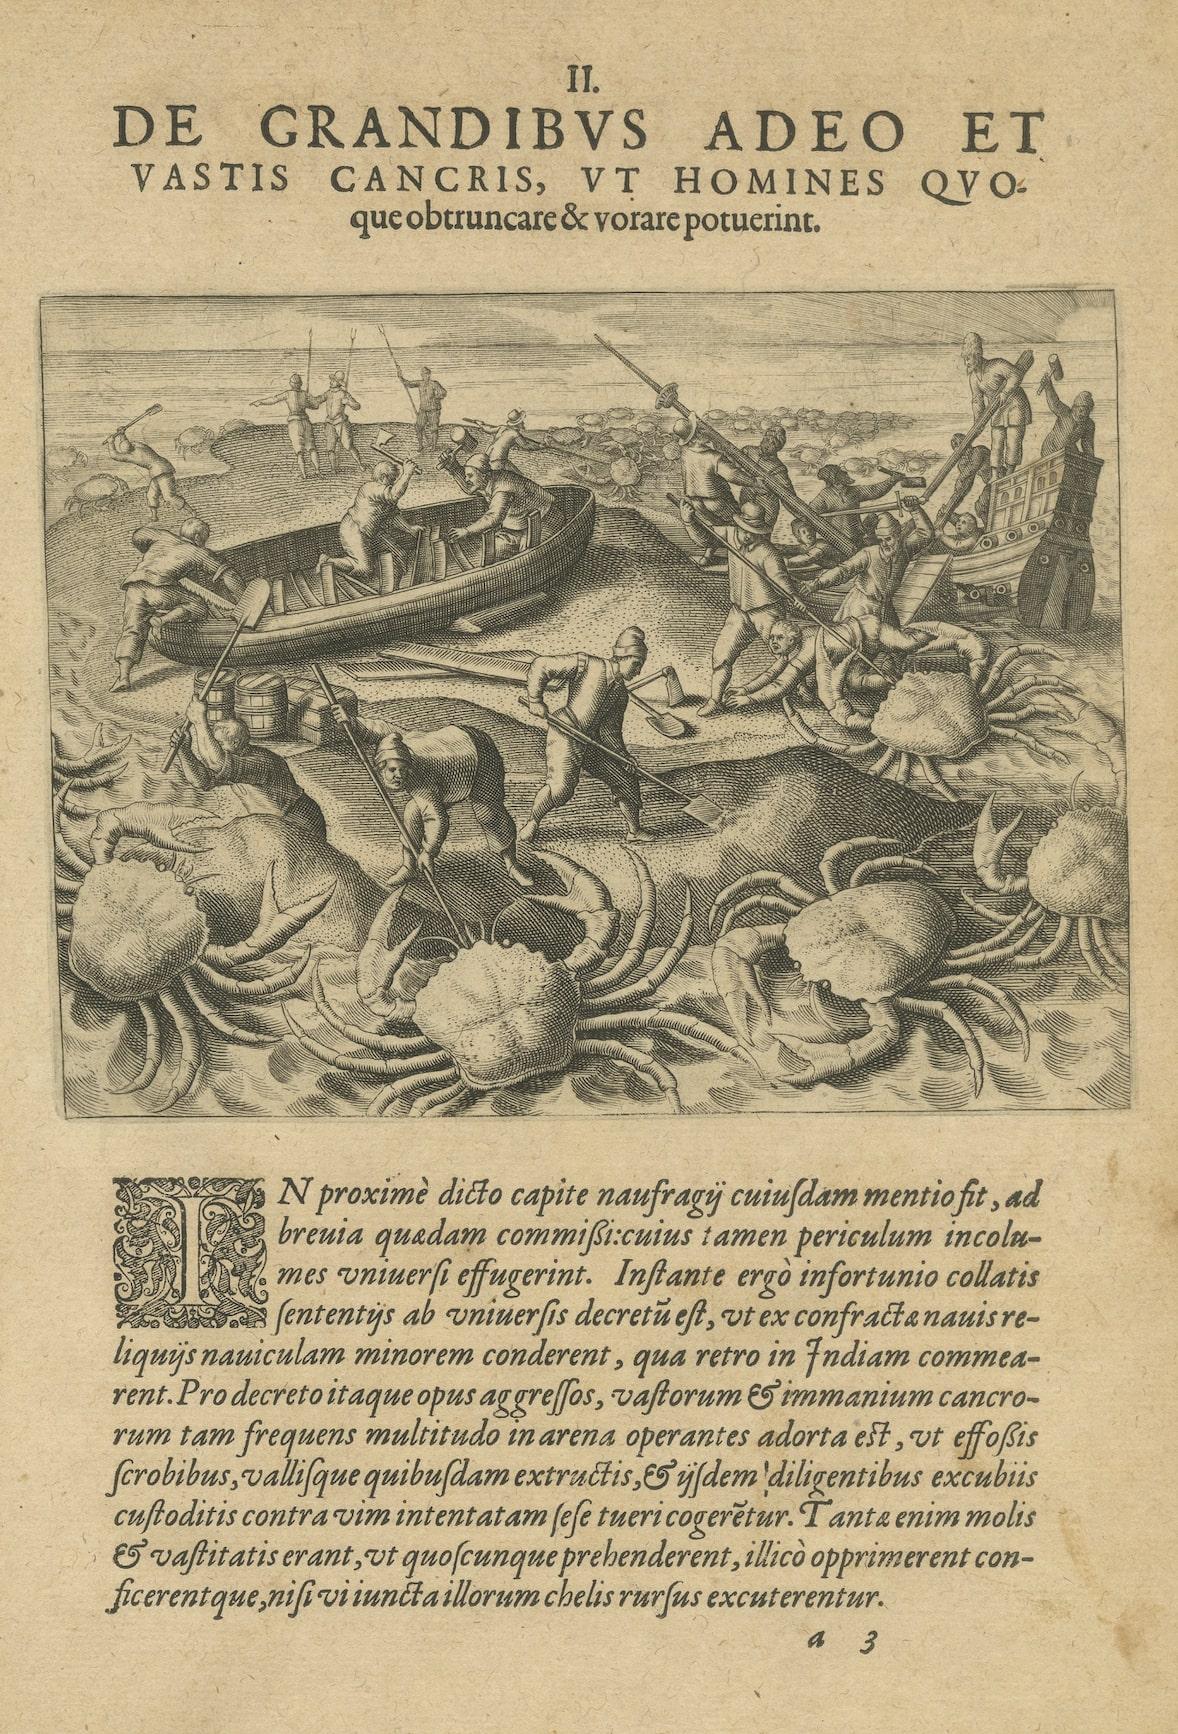 Paper Engraving of a Nautical Battle of Dutch in the Seychelles with Giant Crabs, 1601 For Sale